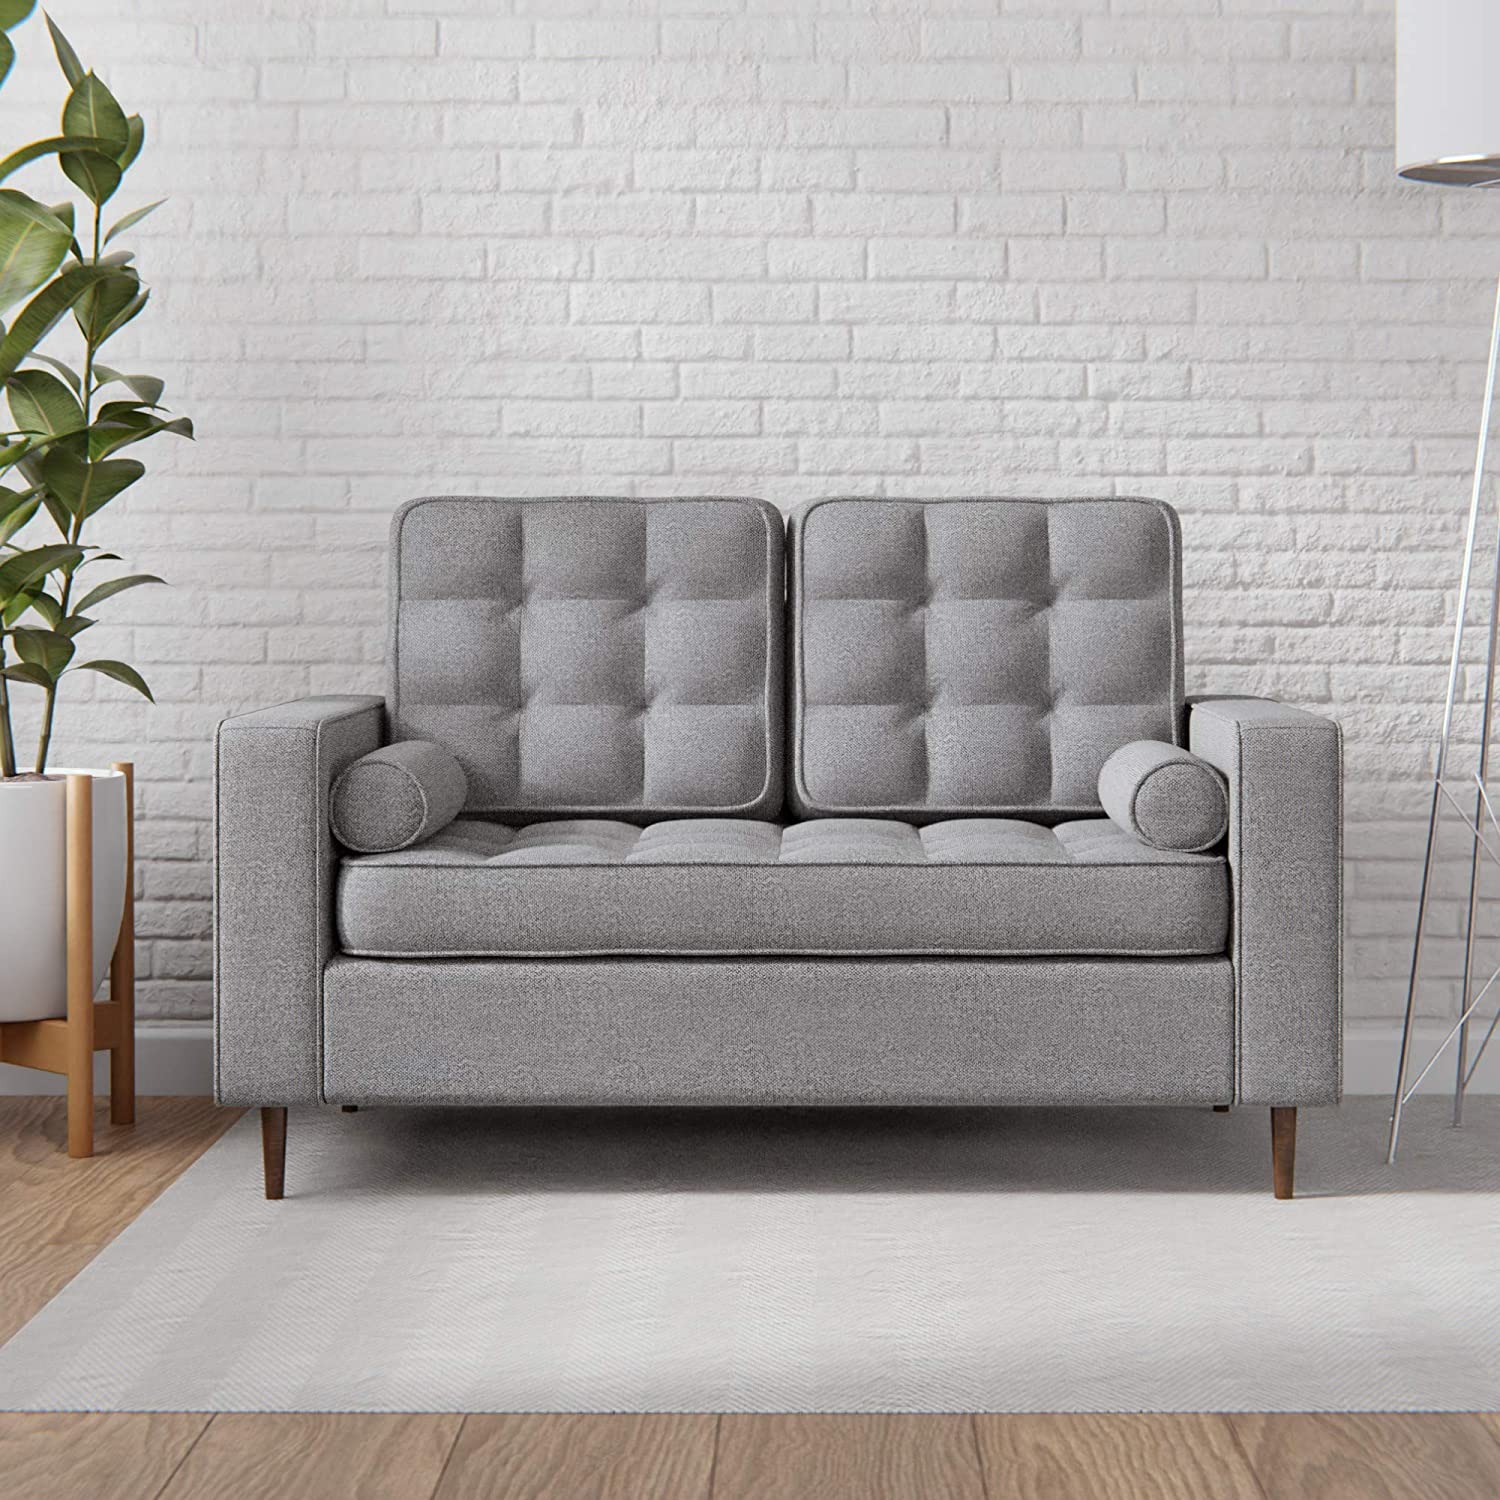 loveseat sofa online shopping, modern sofa set design images with price